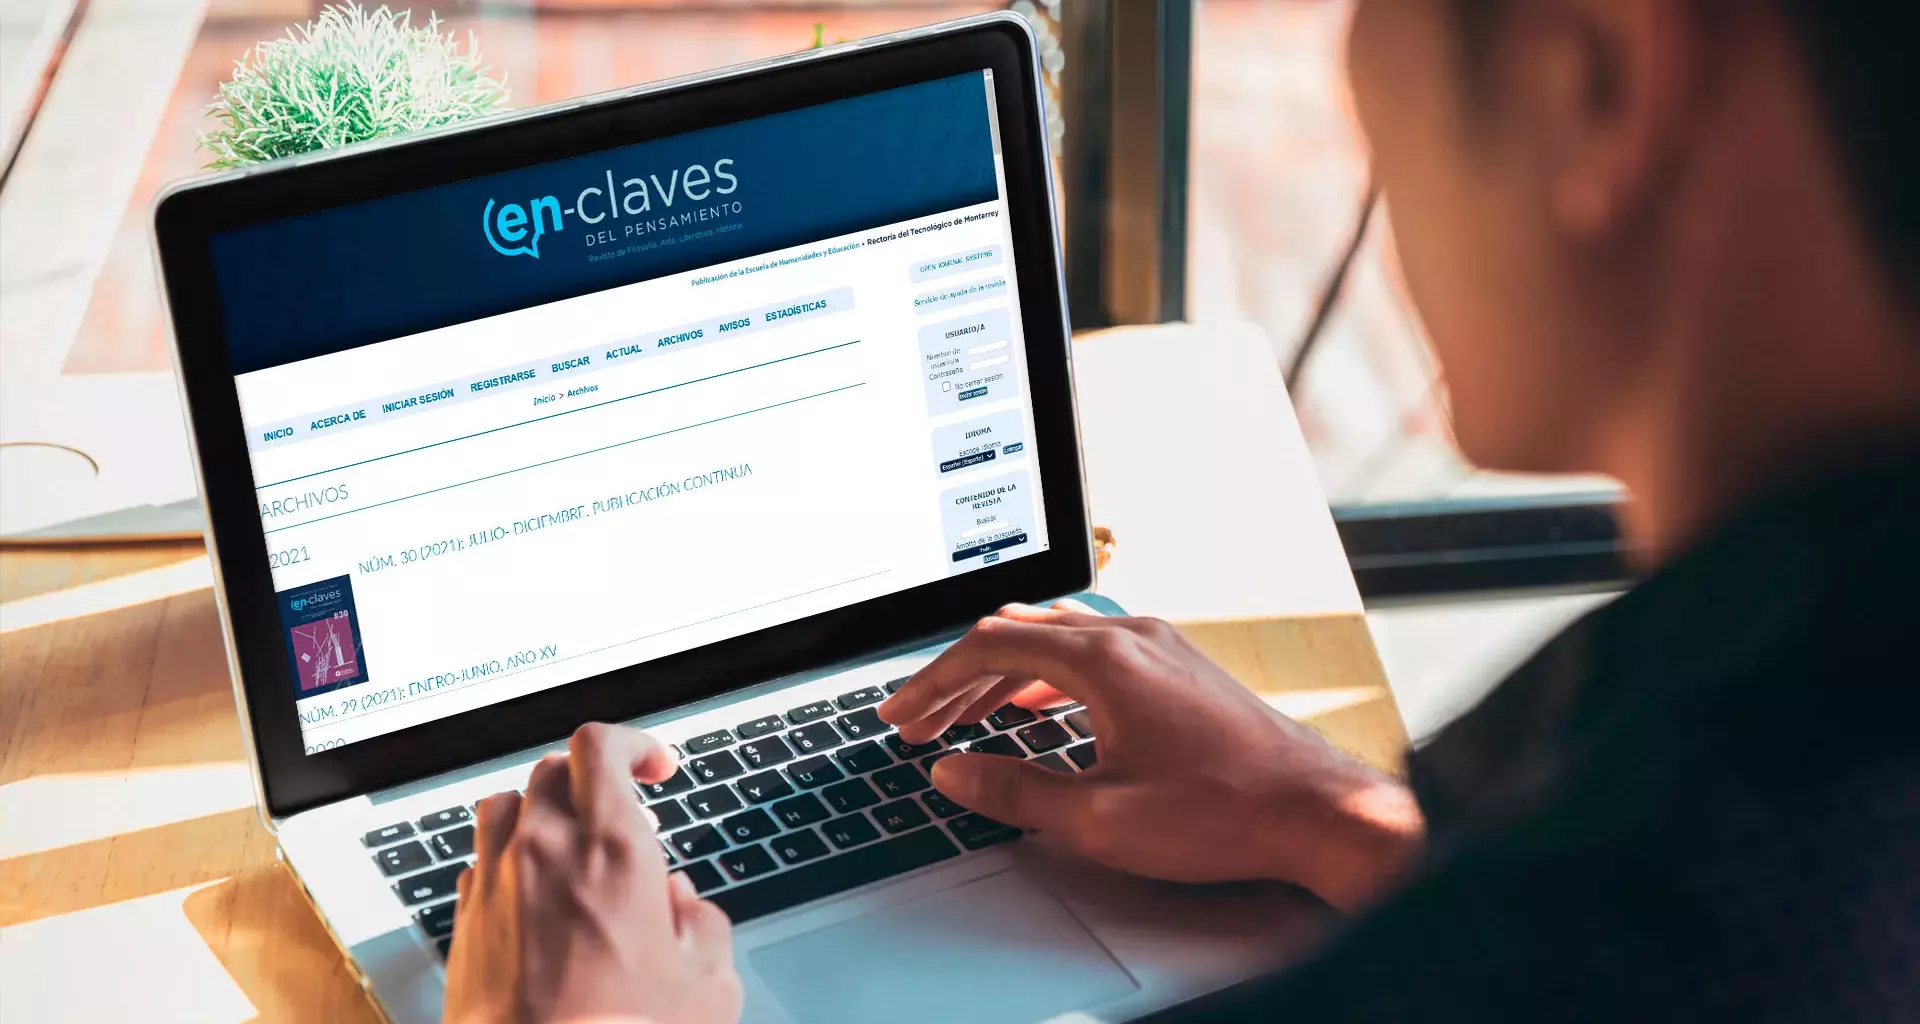 Tec magazine En-claves is the first in the Scopus world database